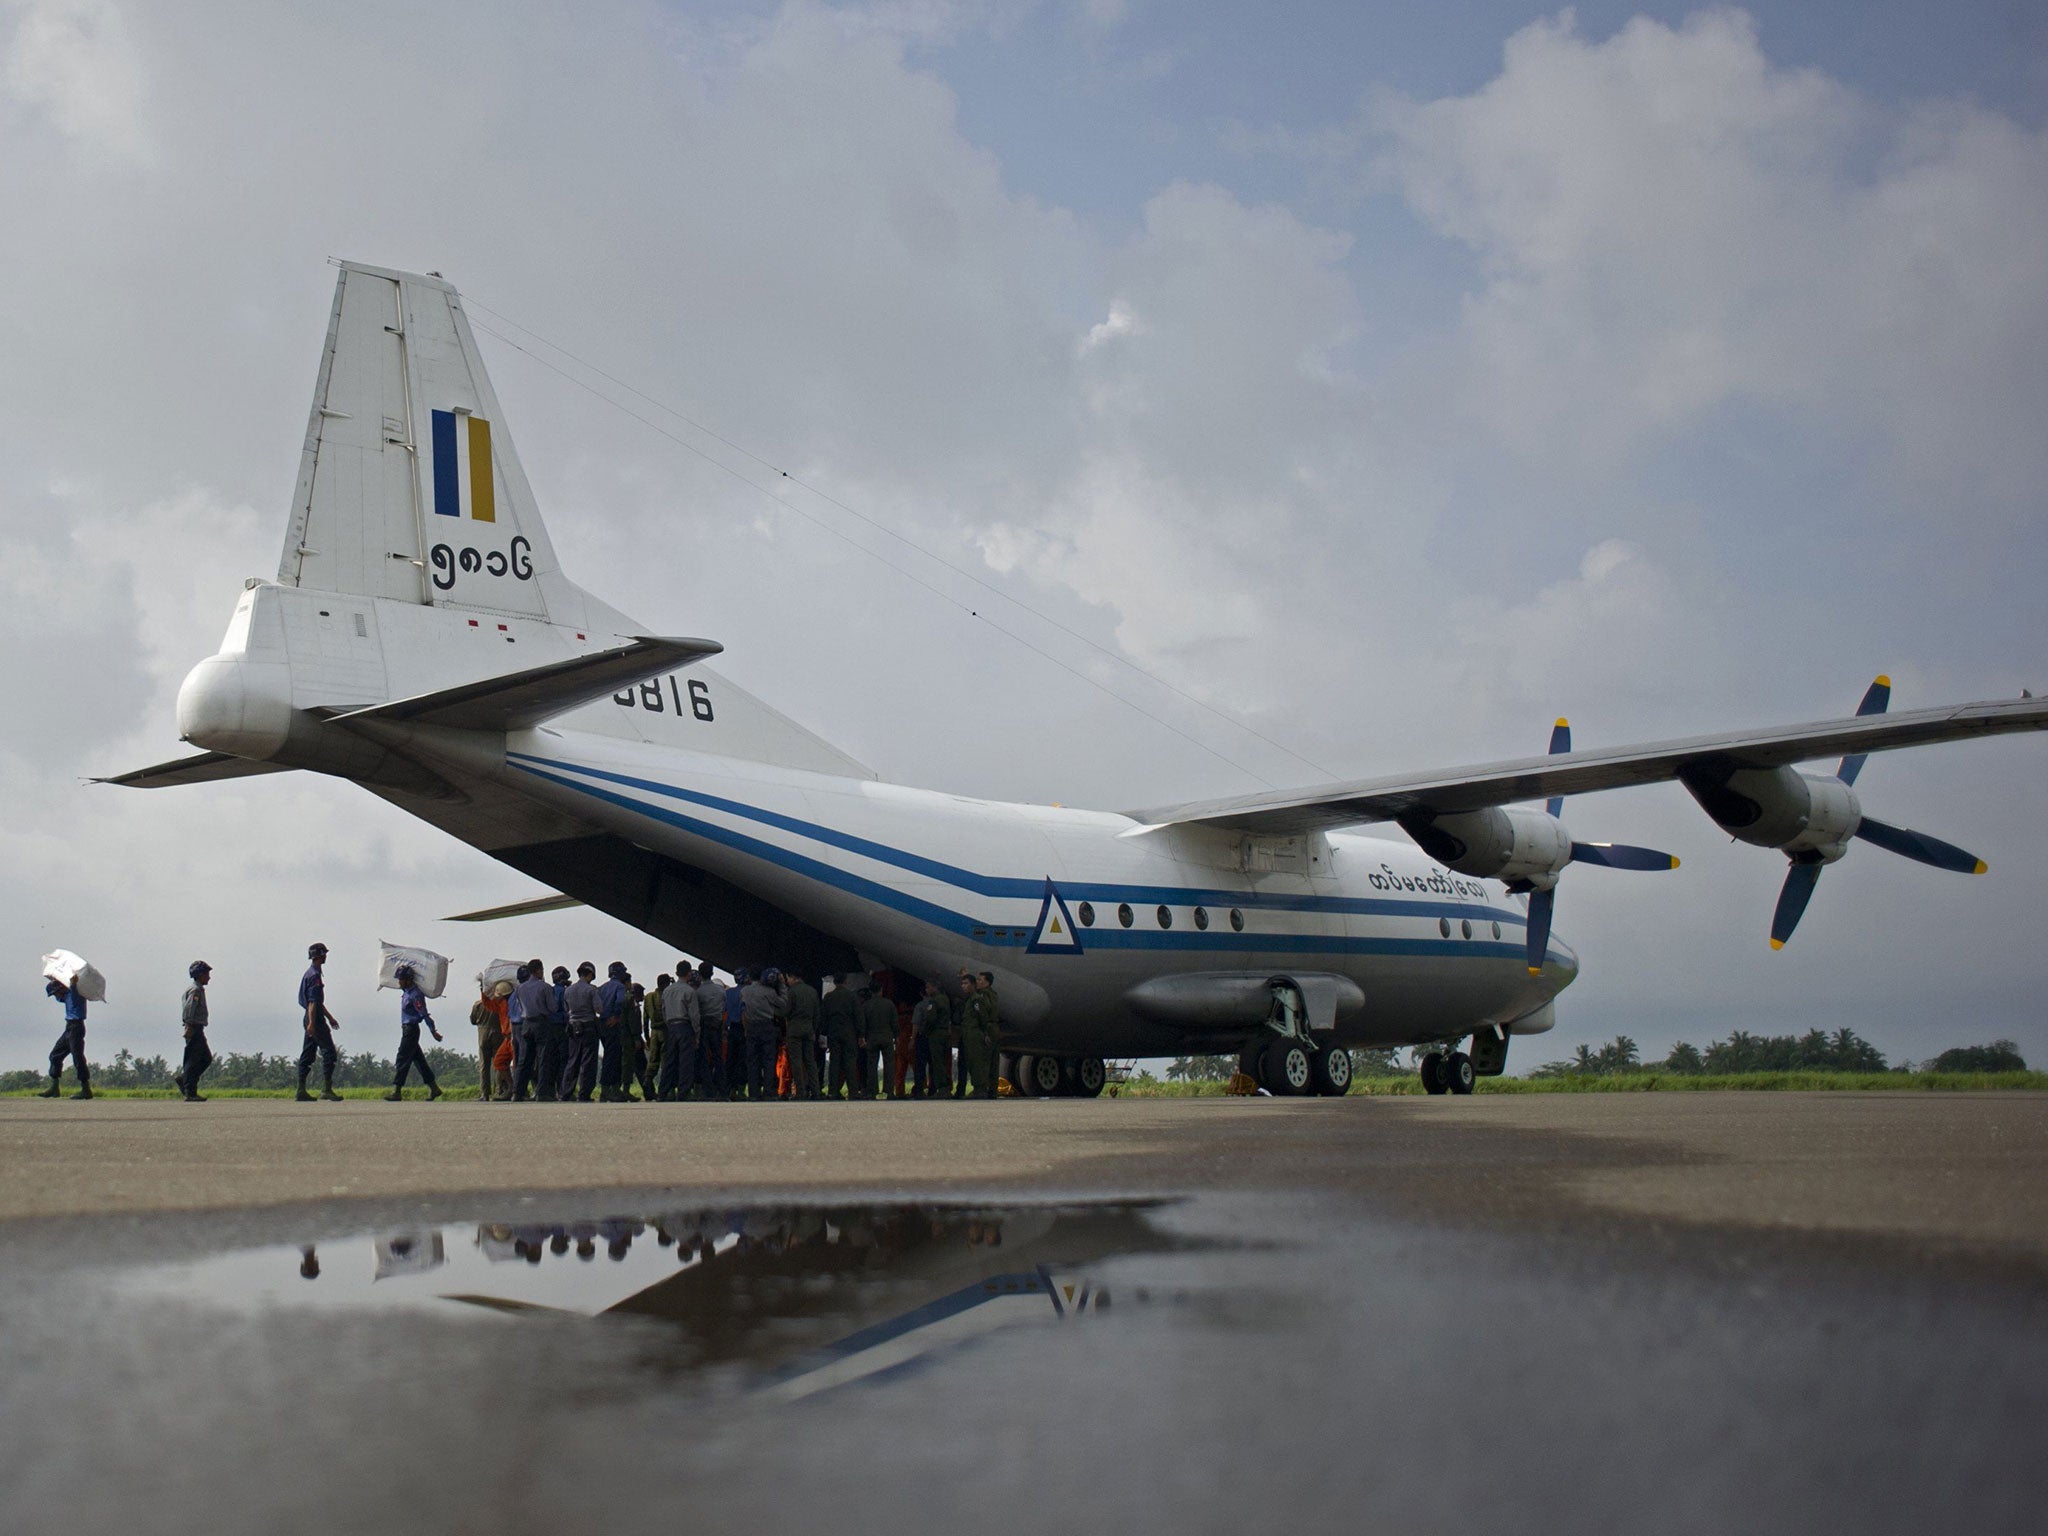 Burmese Military Plane Missing Parts Found In Sea After